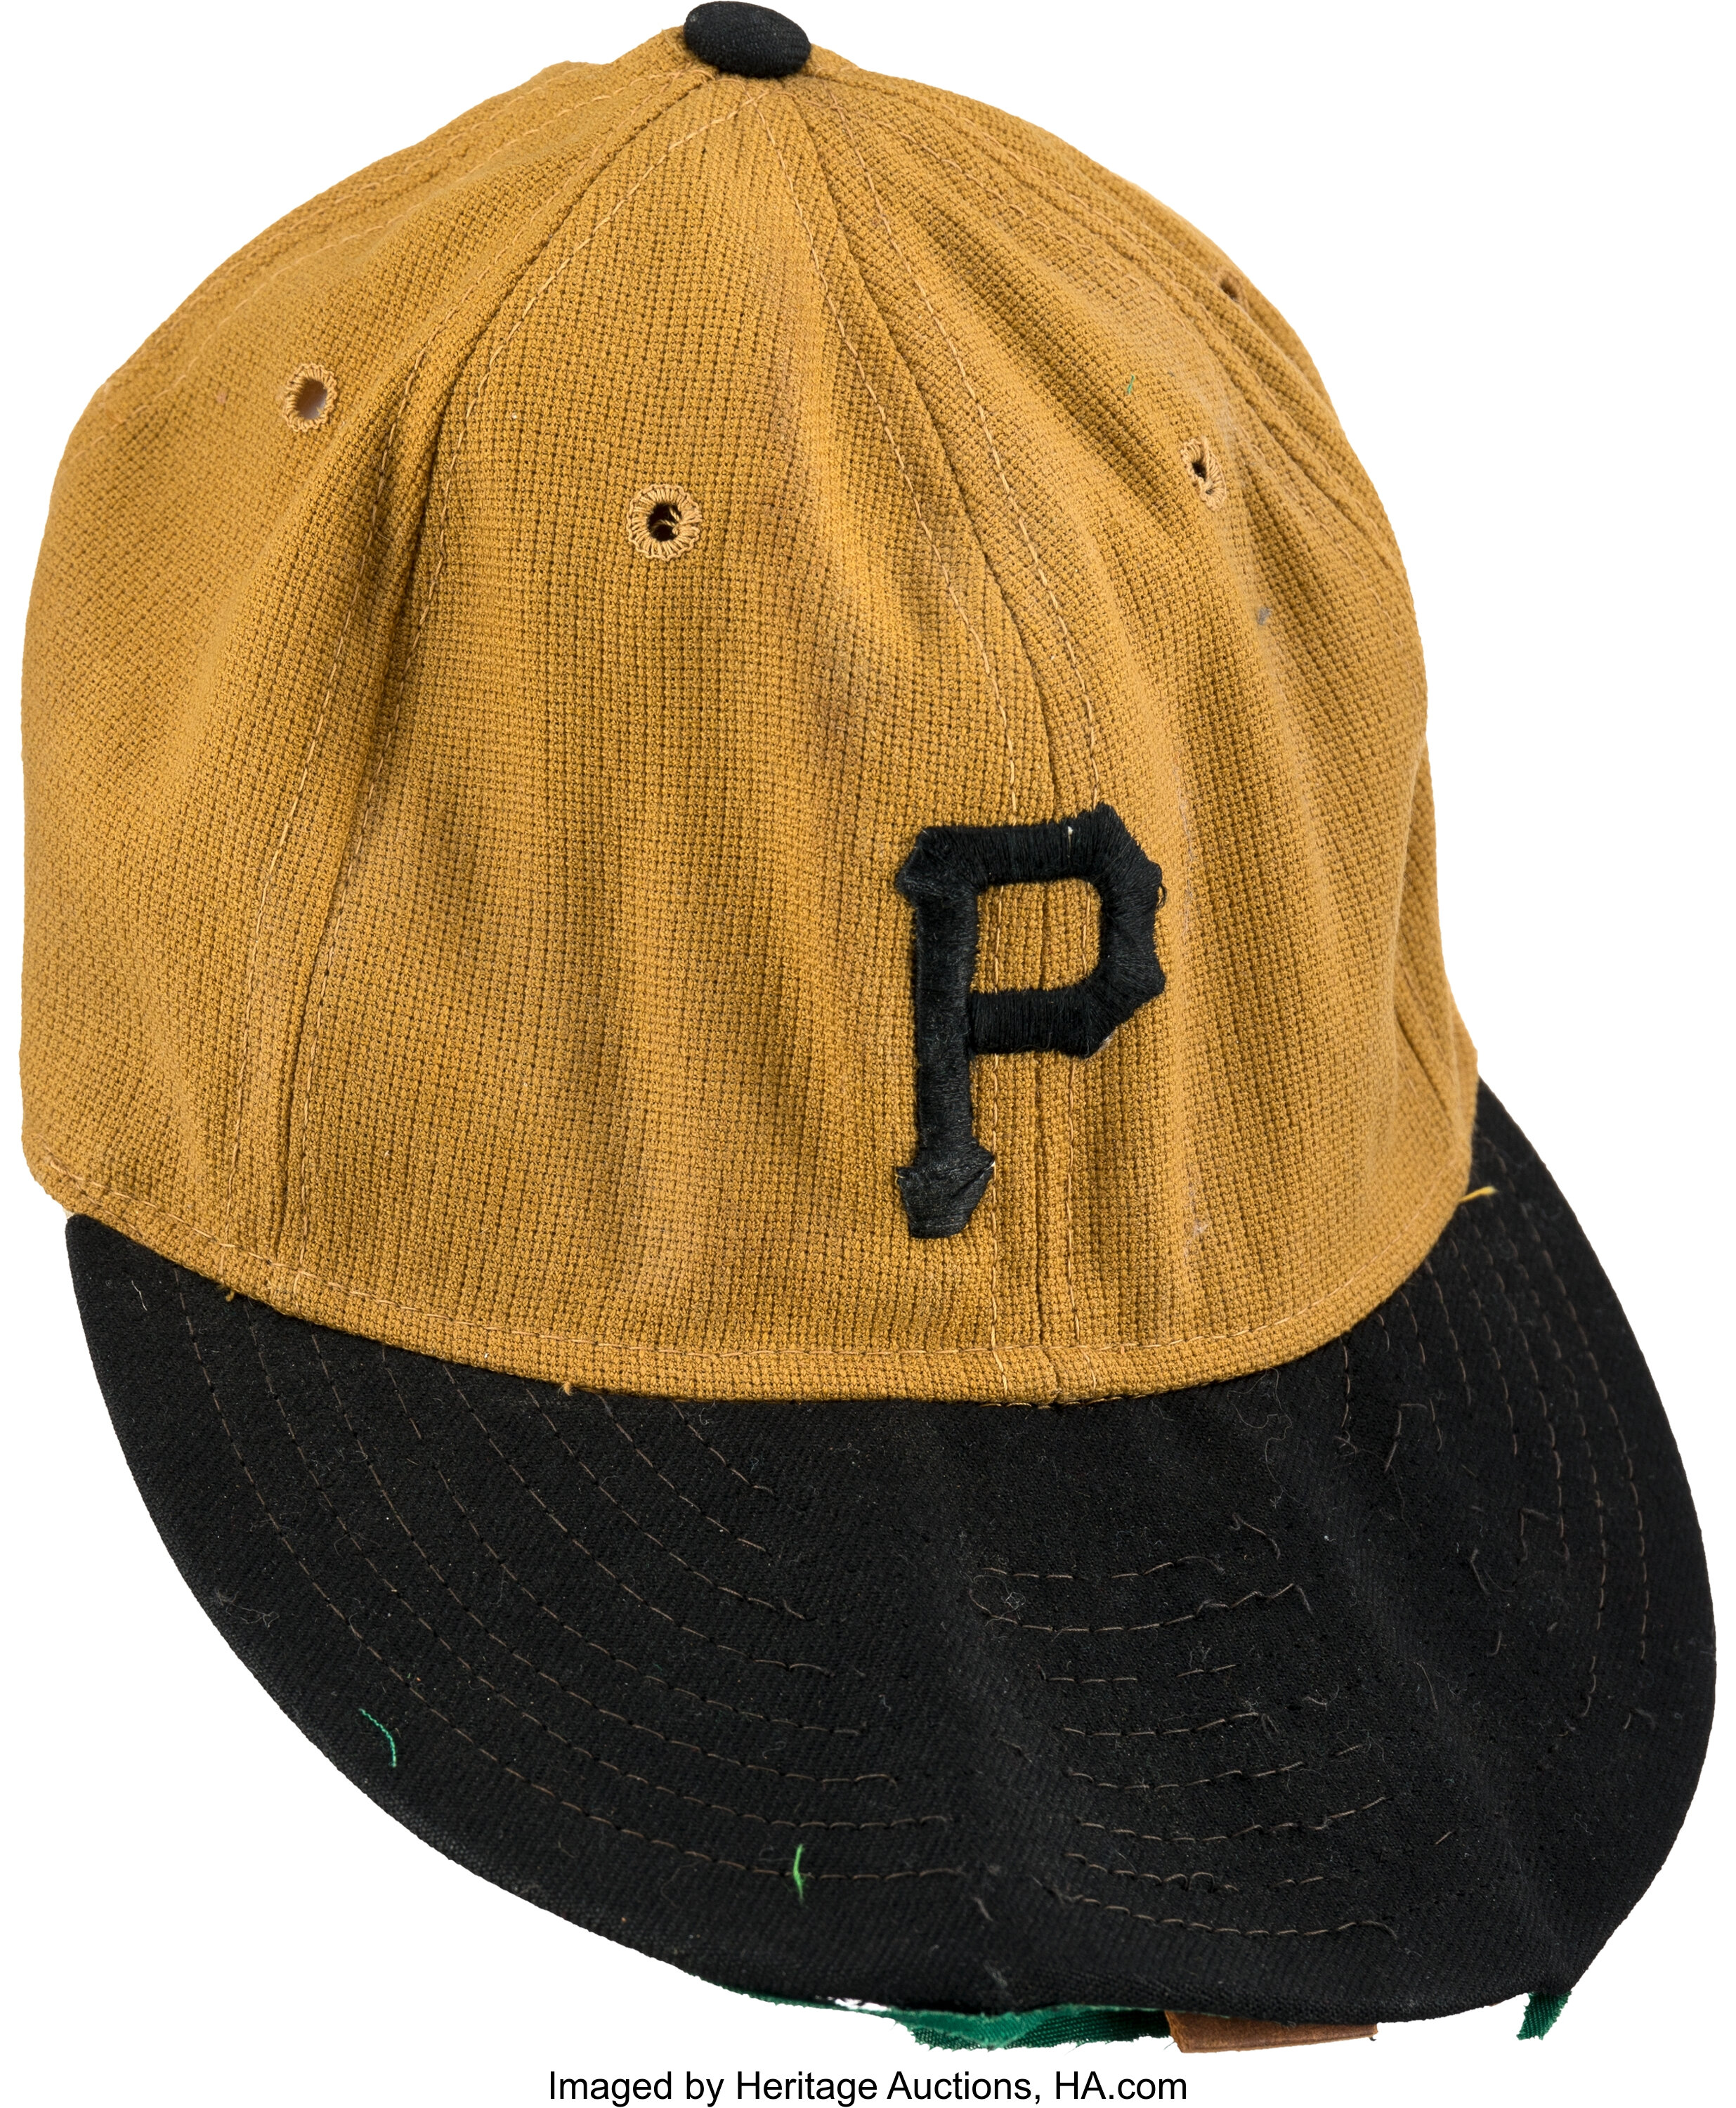 Pirates 1971 World Series Champs Pittsburgh Pirates LIMITED